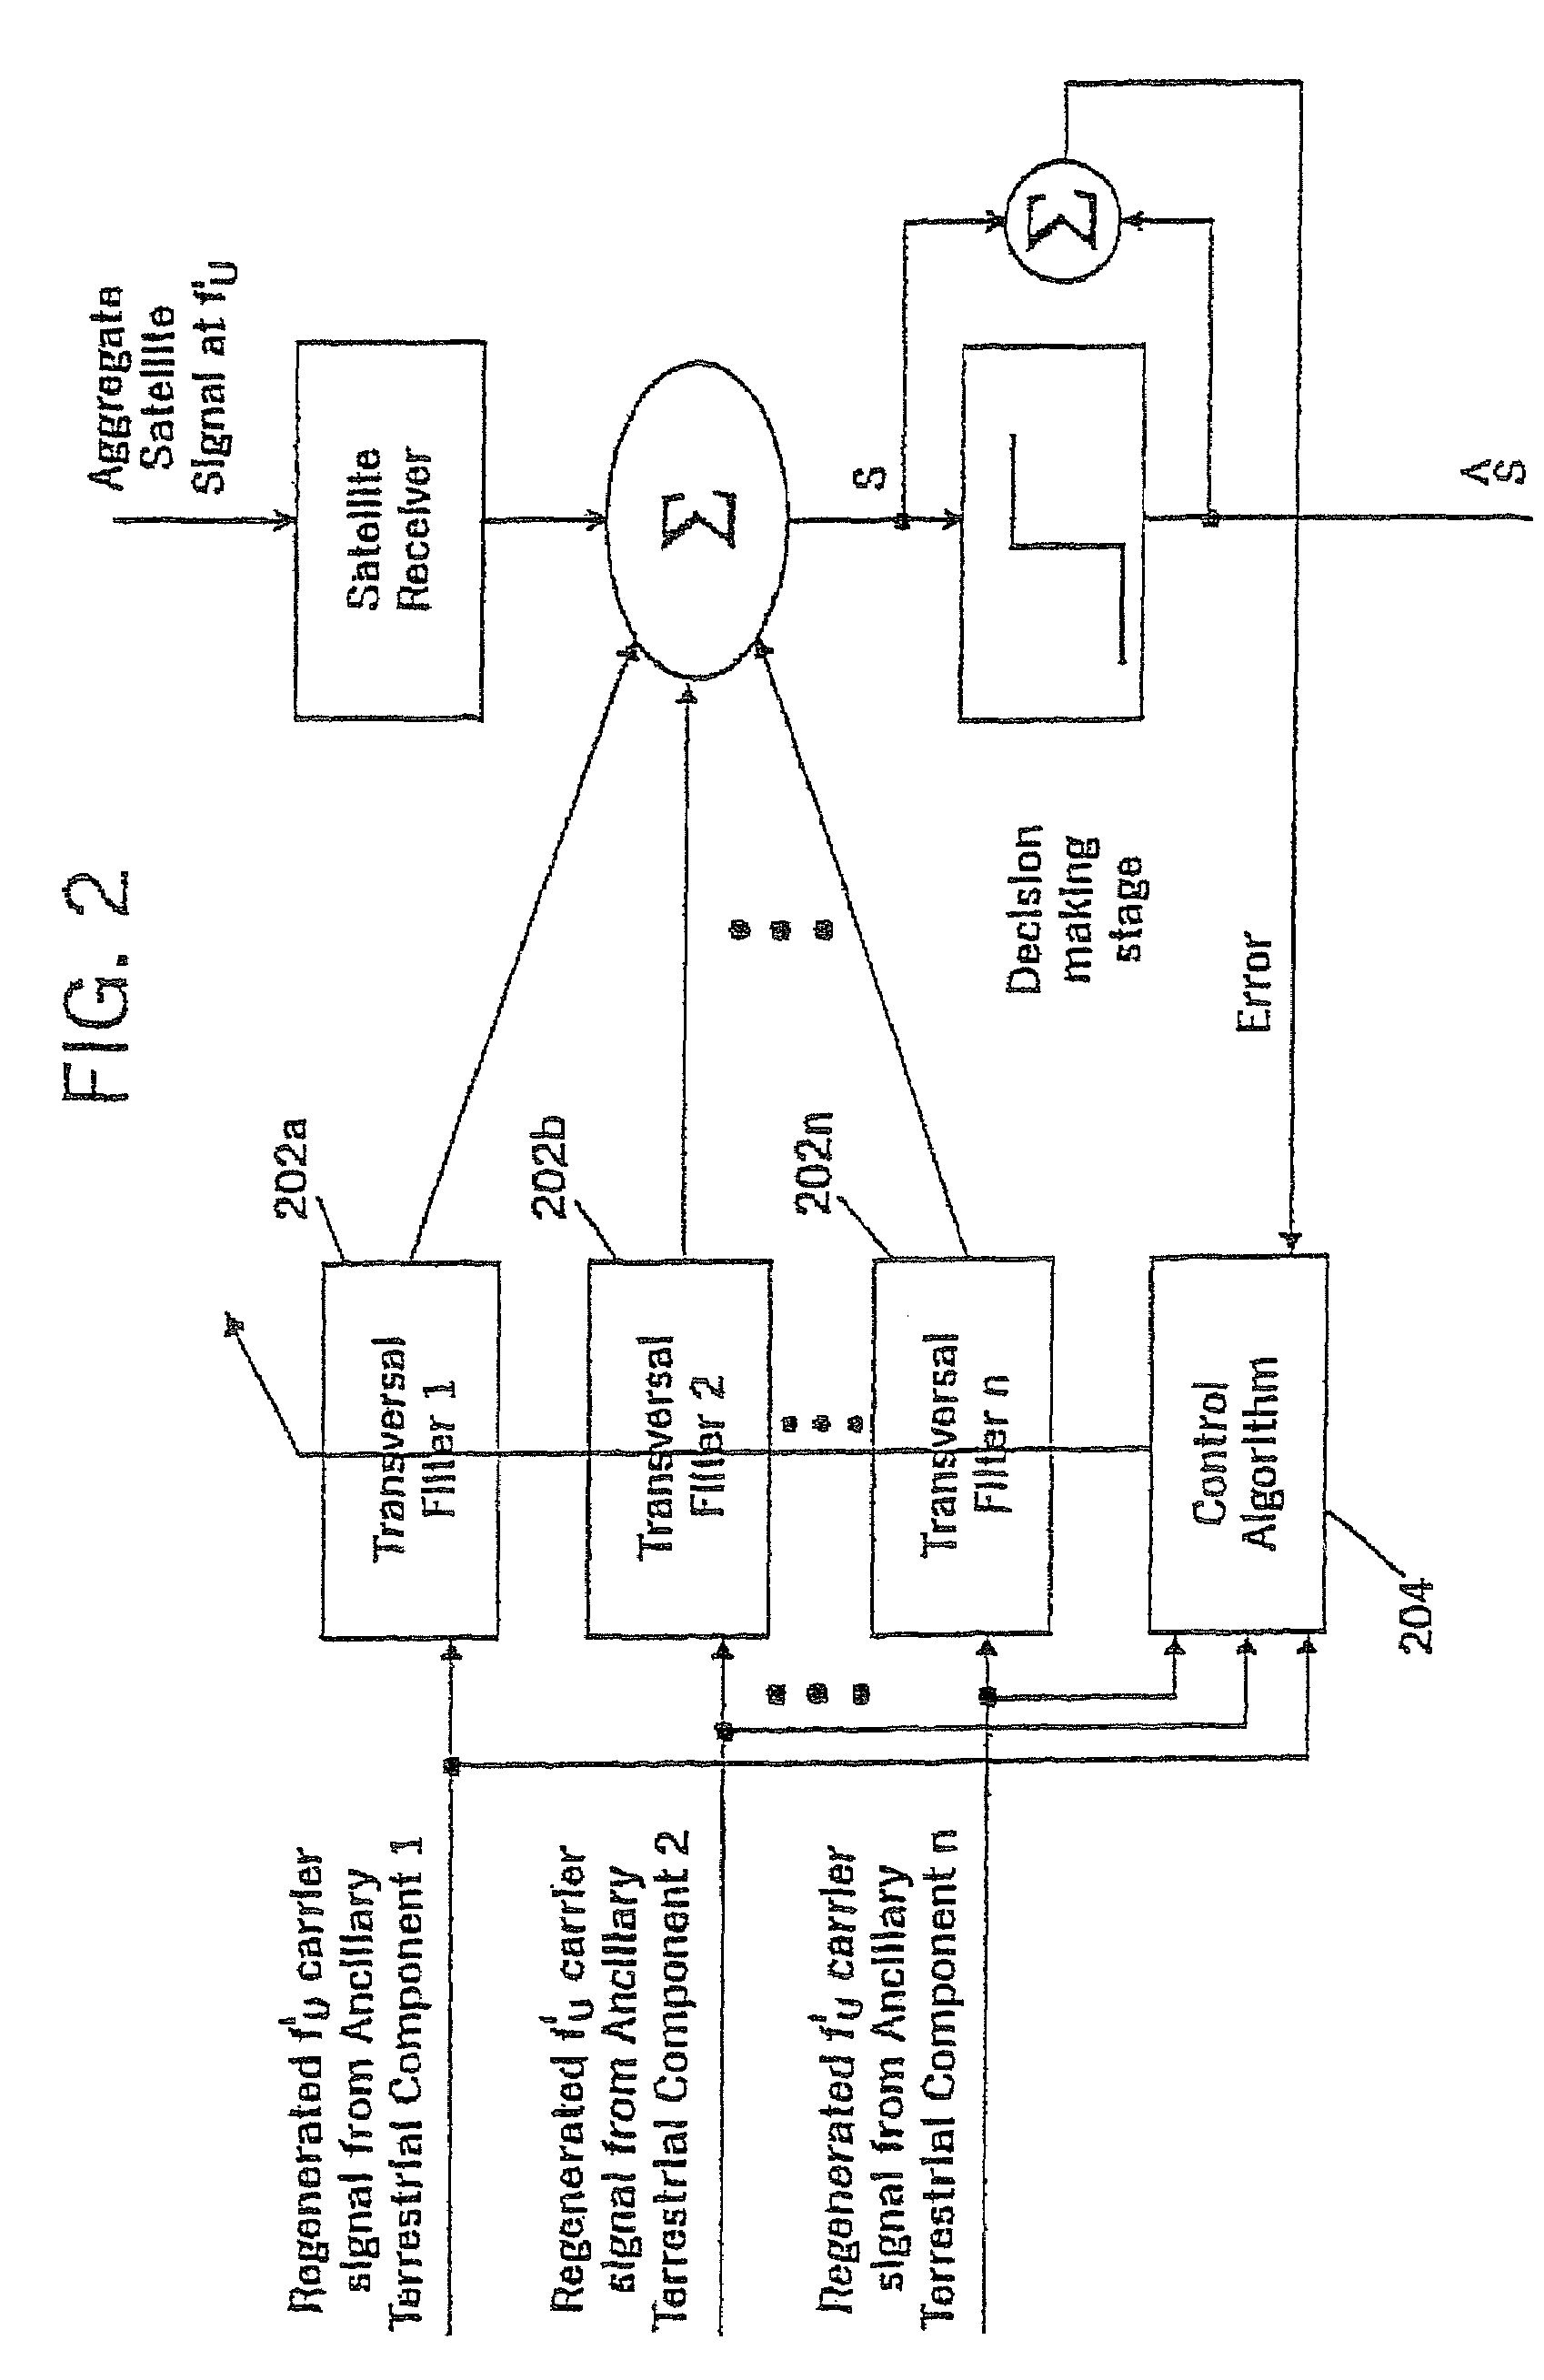 Systems and methods for controlling a level of interference to a wireless receiver responsive to a power level associated with a wireless transmitter